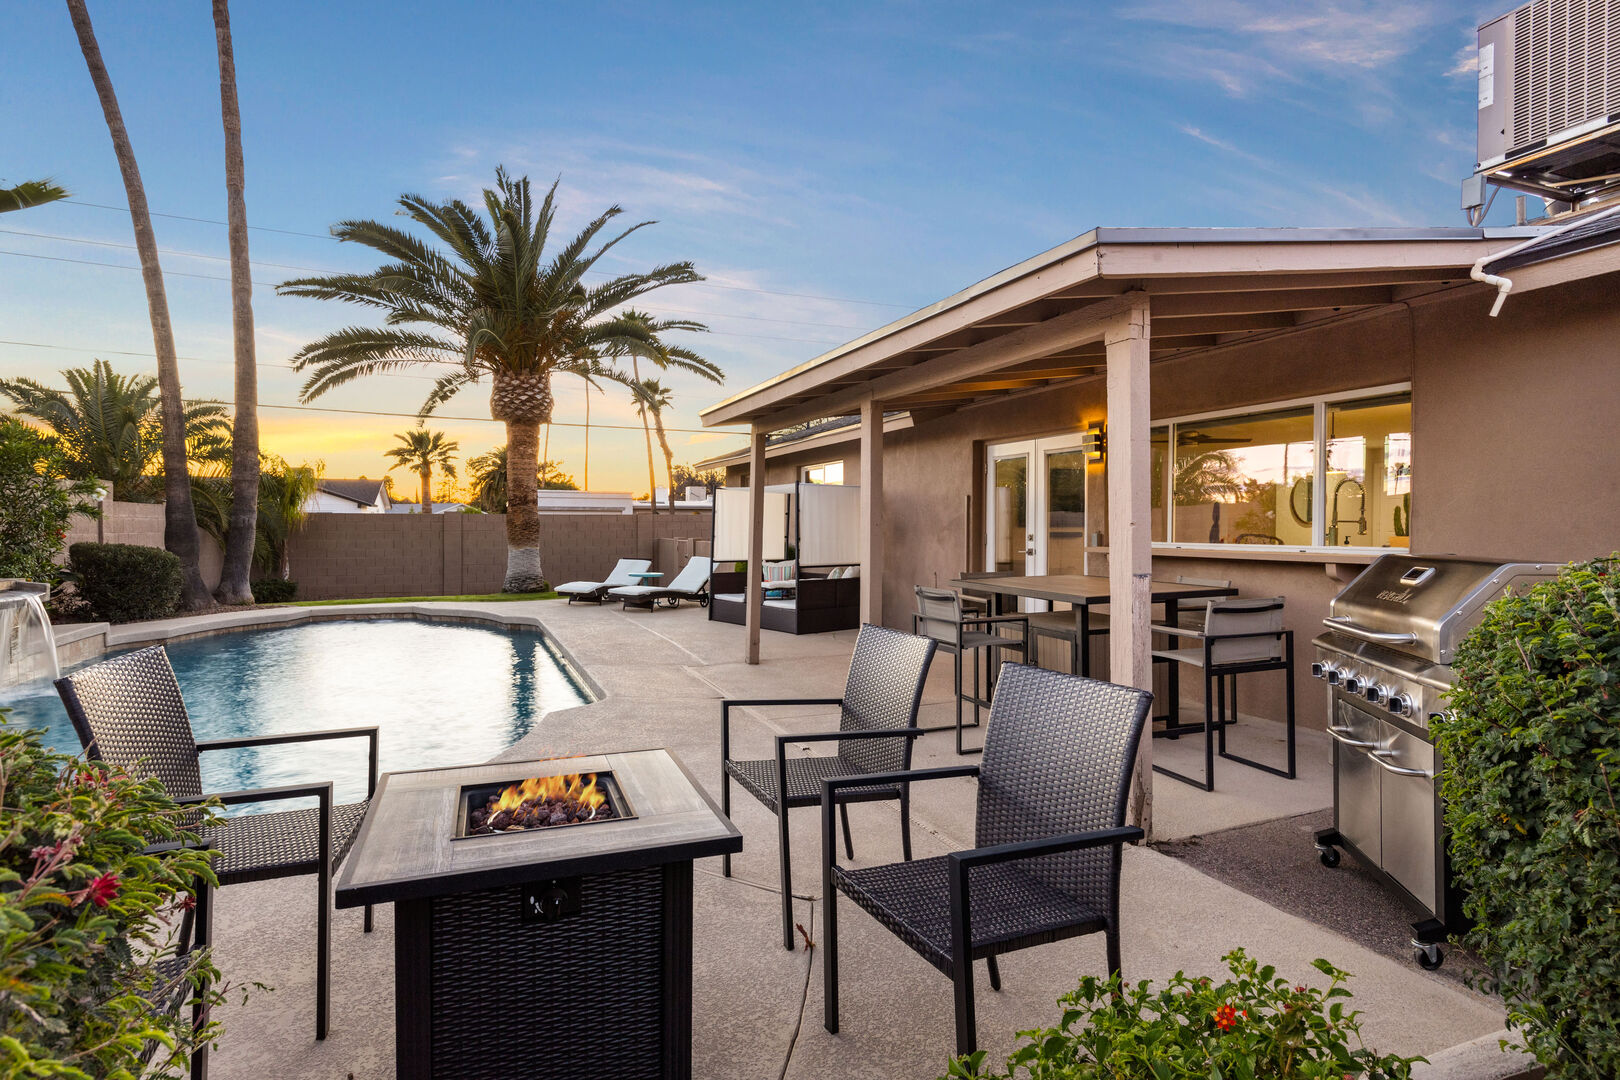 Firepit, Grill & Pool in Background